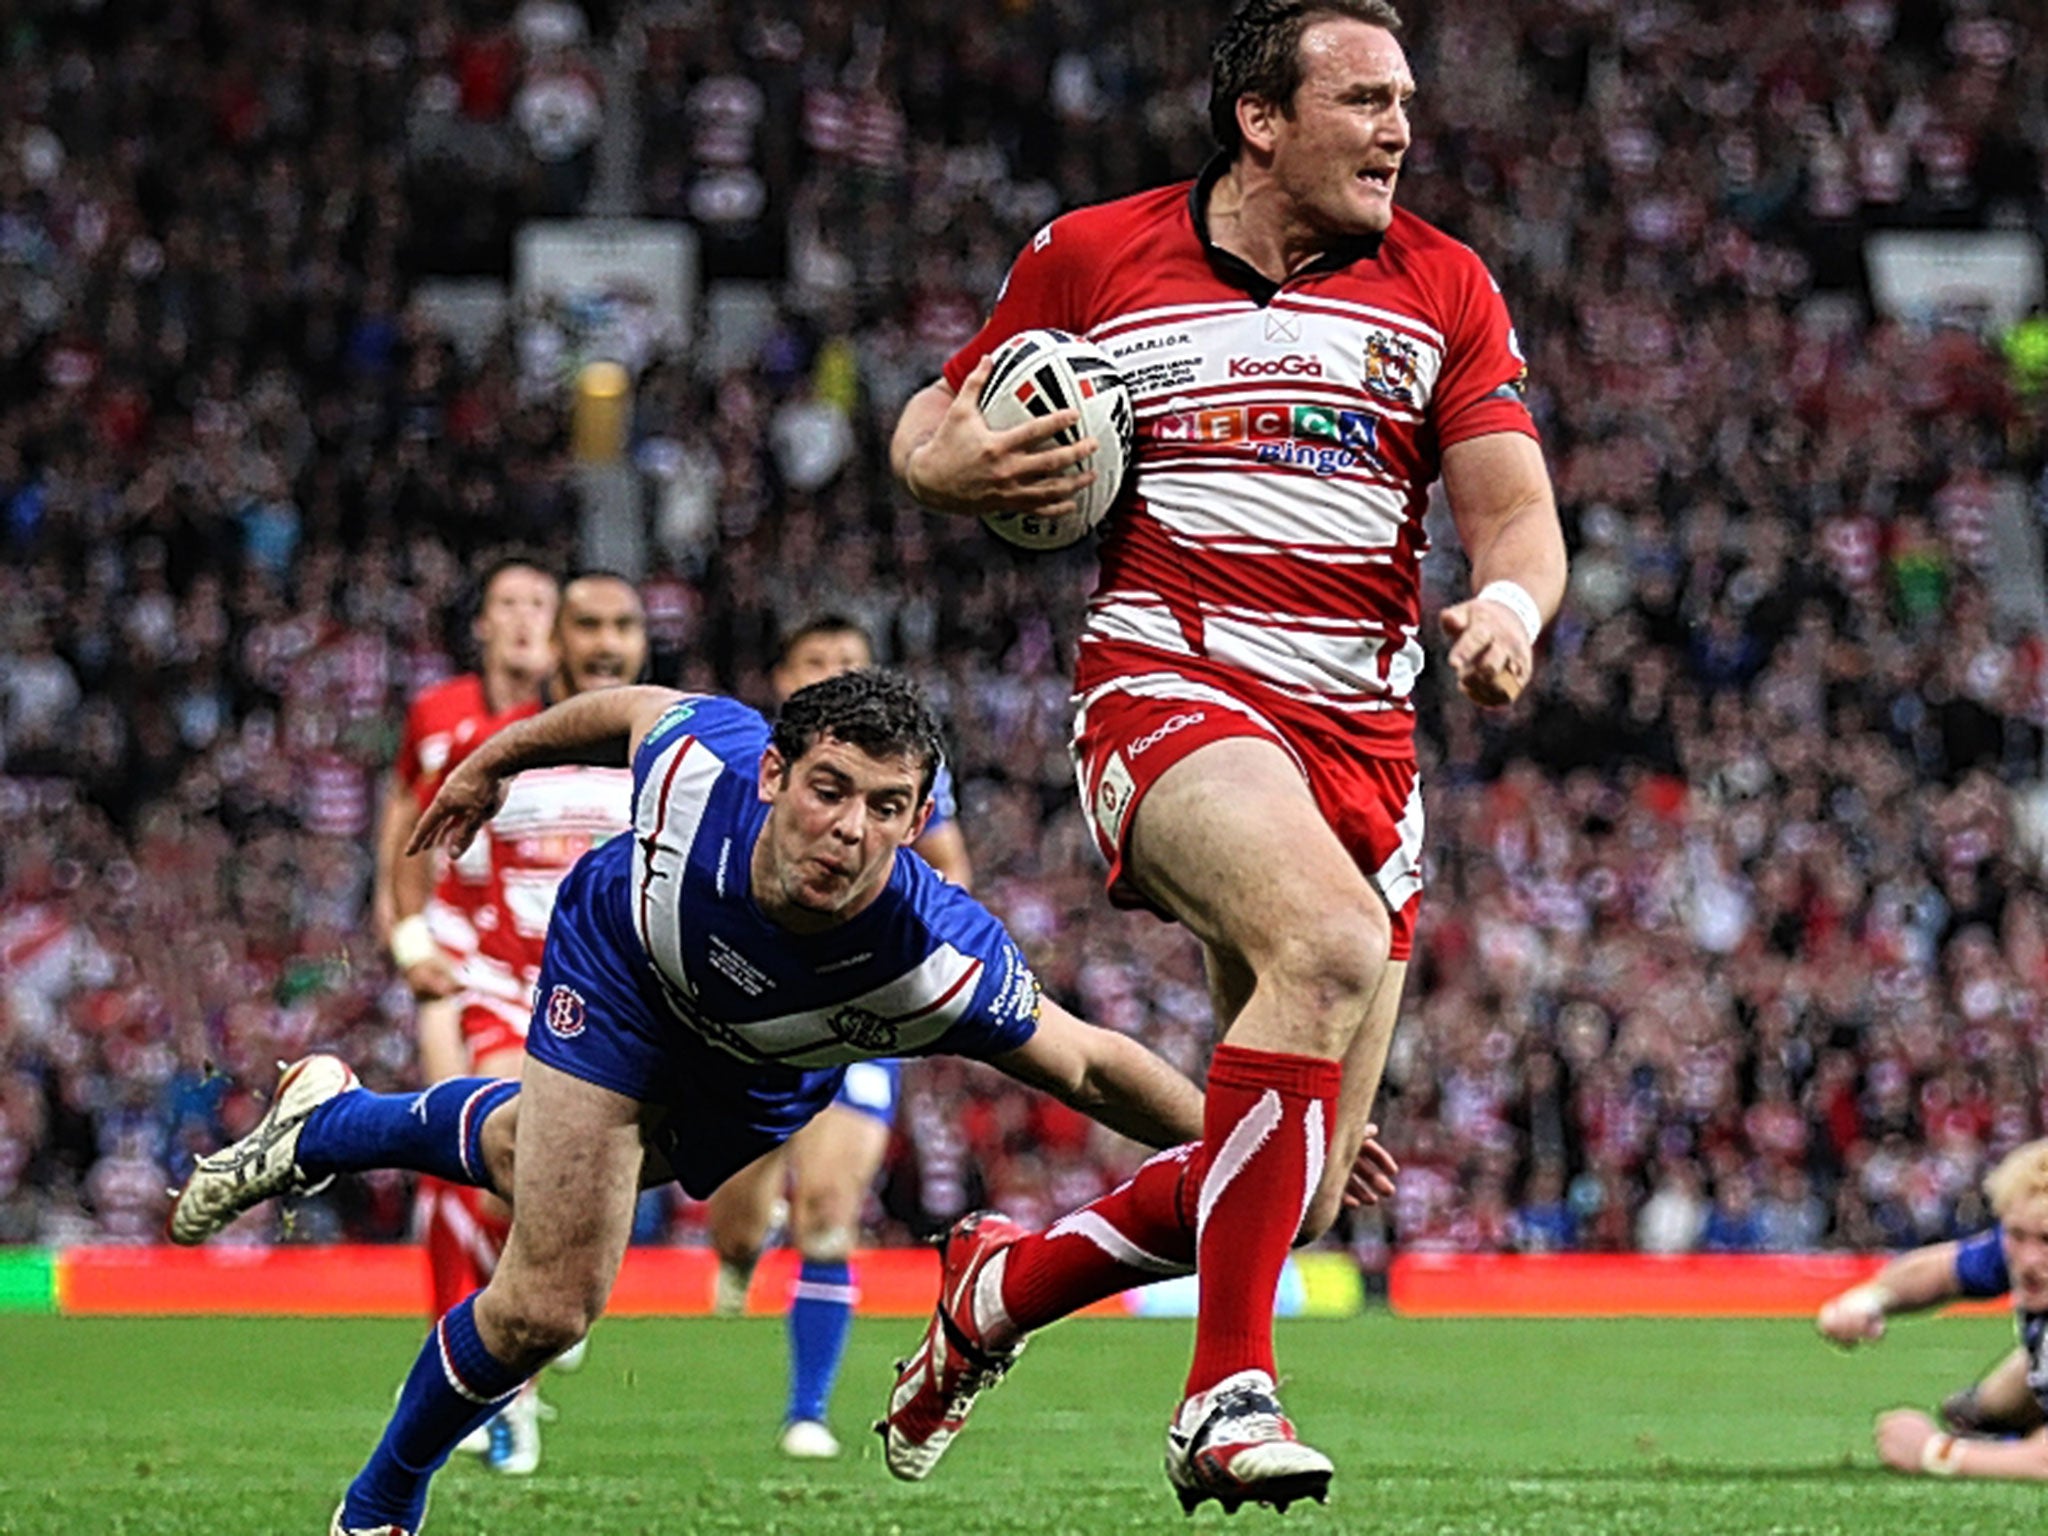 Martin Gleeson scores for Wigan in the 2010 Grand Final, the year before his 18-month ban for a positive drug test